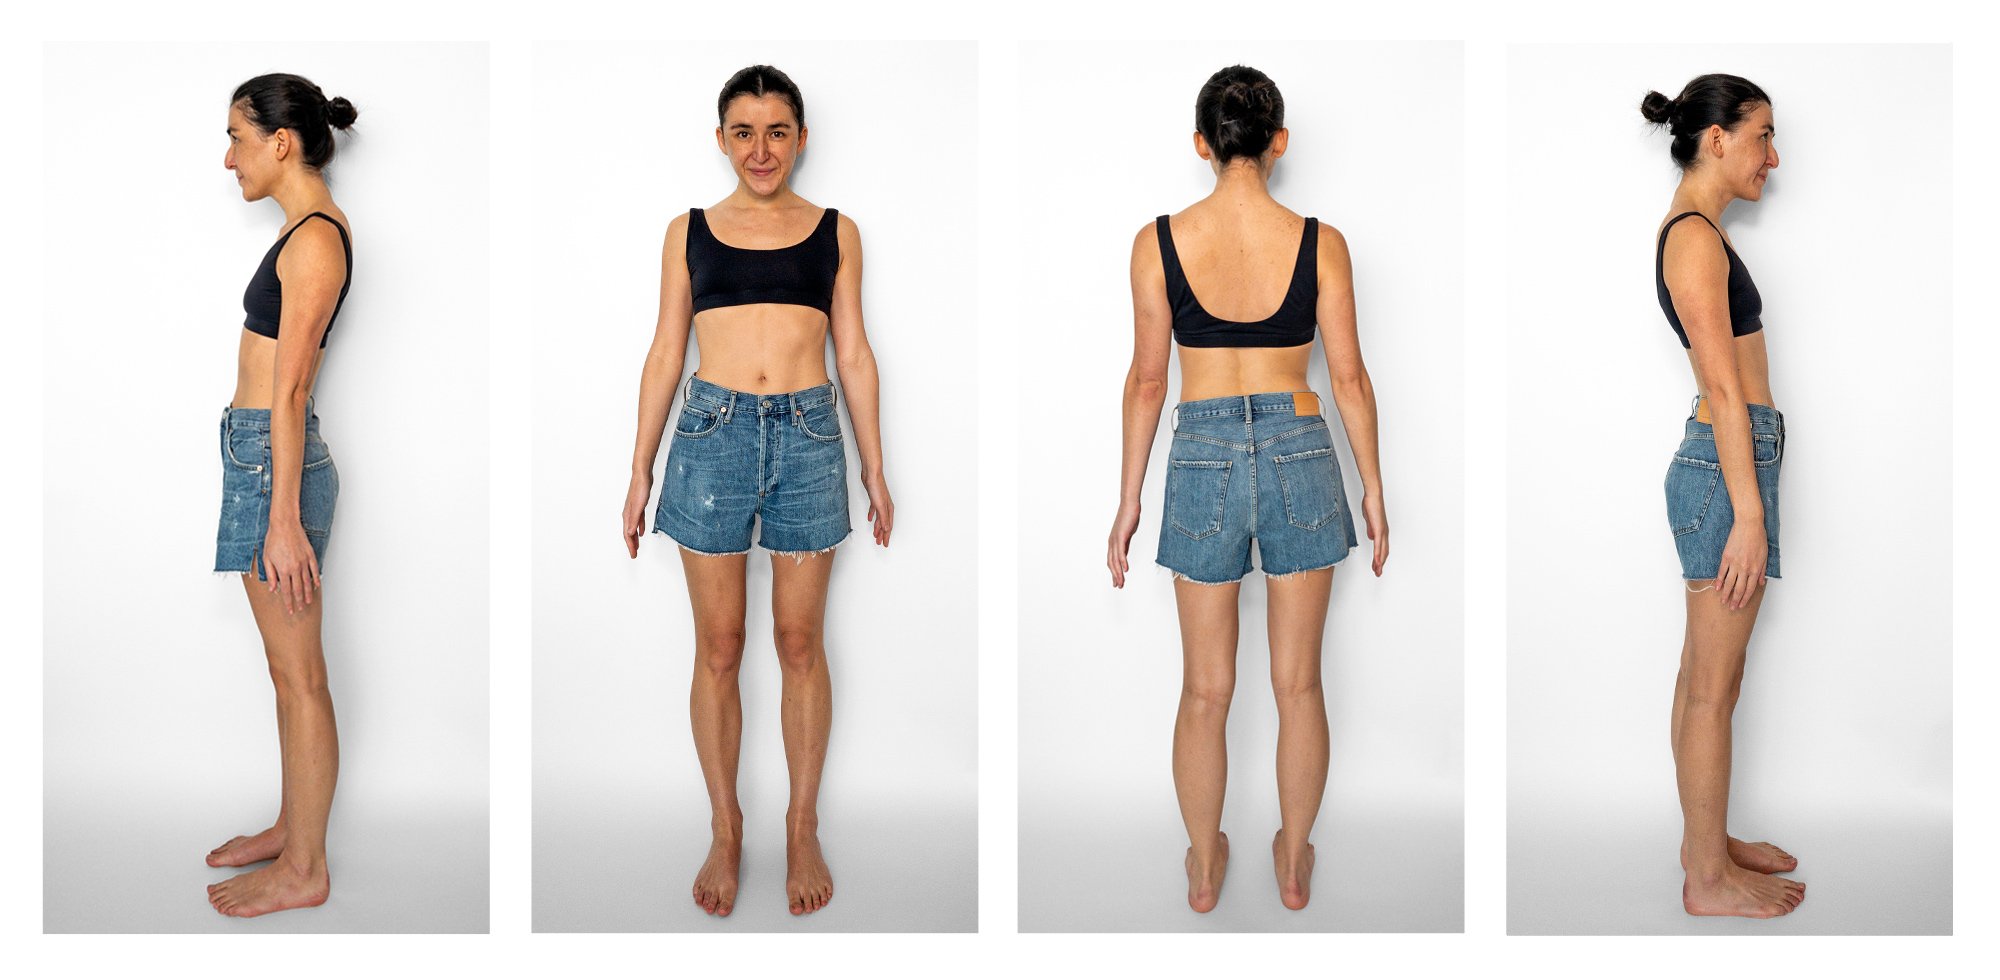 Citizens of Humanity Marlow shorts sizing